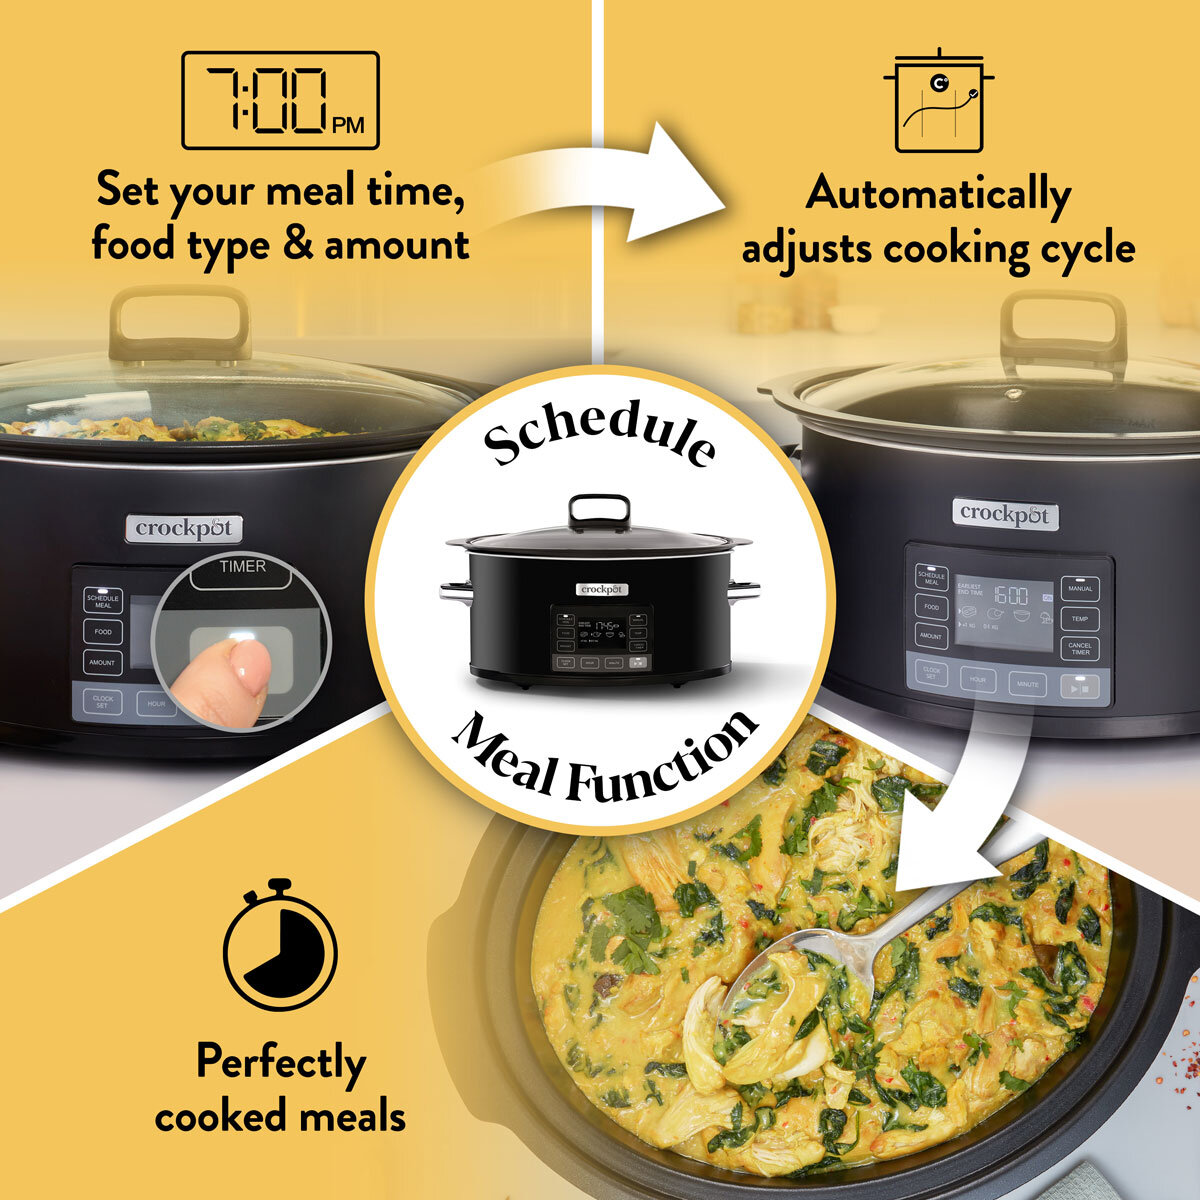 Image describing the time select functions of Crockpot